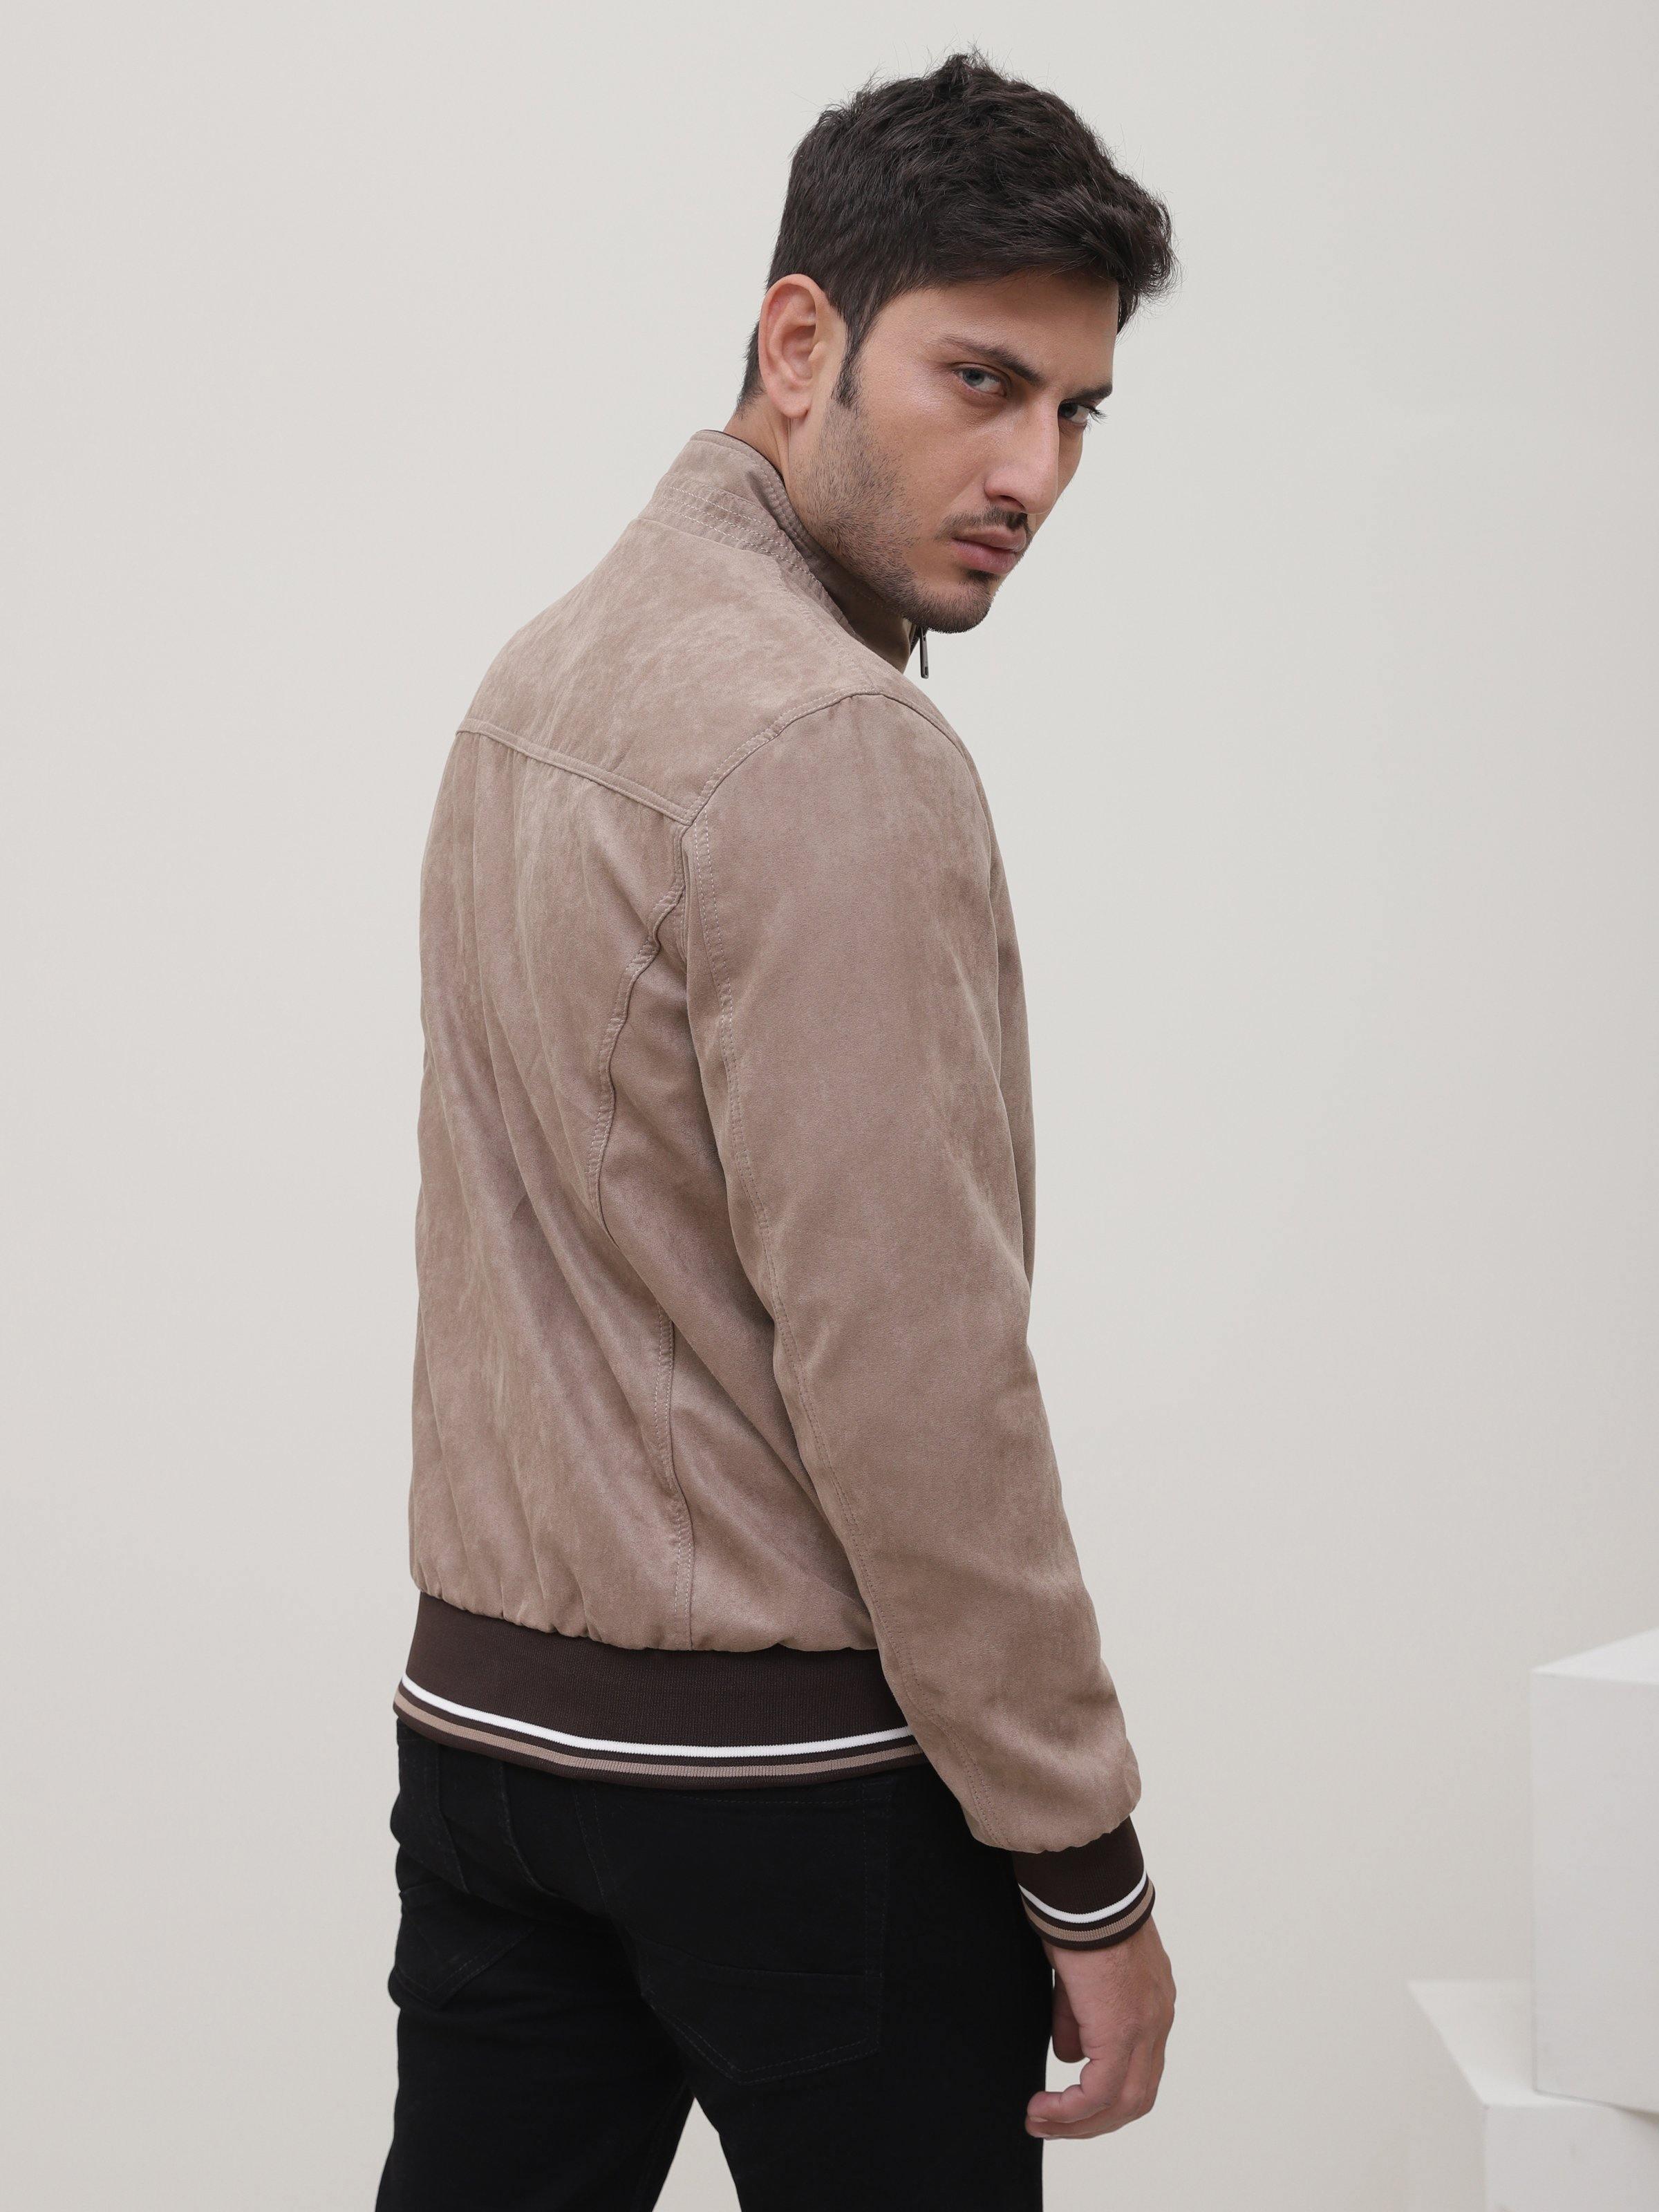 SUEDE JACKET LIGHT BROWN at Charcoal Clothing